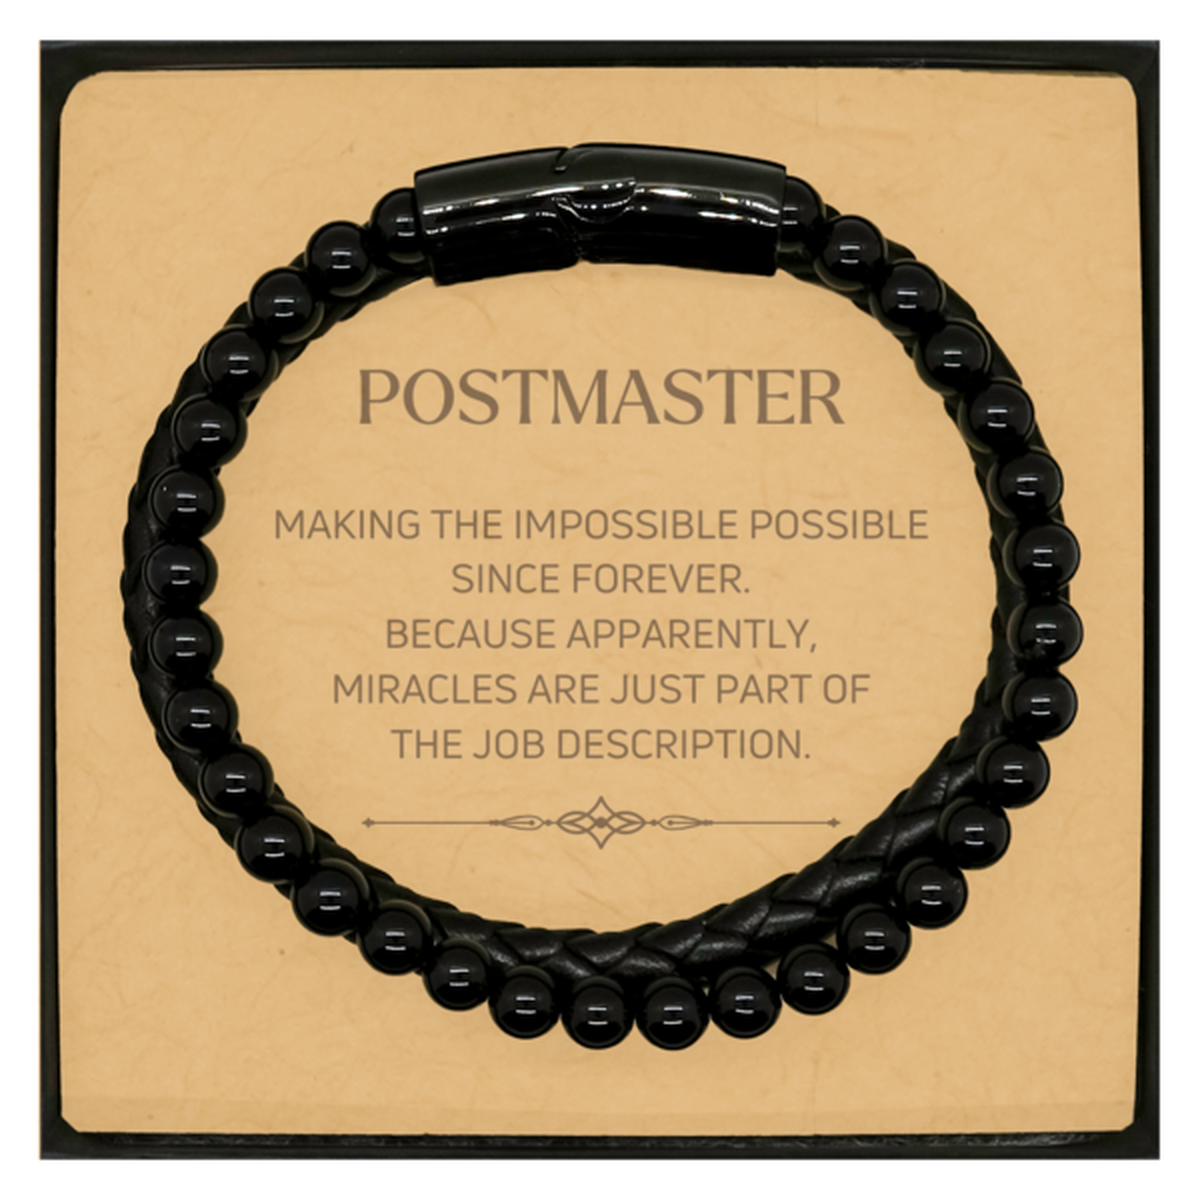 Funny Postmaster Gifts, Miracles are just part of the job description, Inspirational Birthday Christmas Stone Leather Bracelets For Postmaster, Men, Women, Coworkers, Friends, Boss